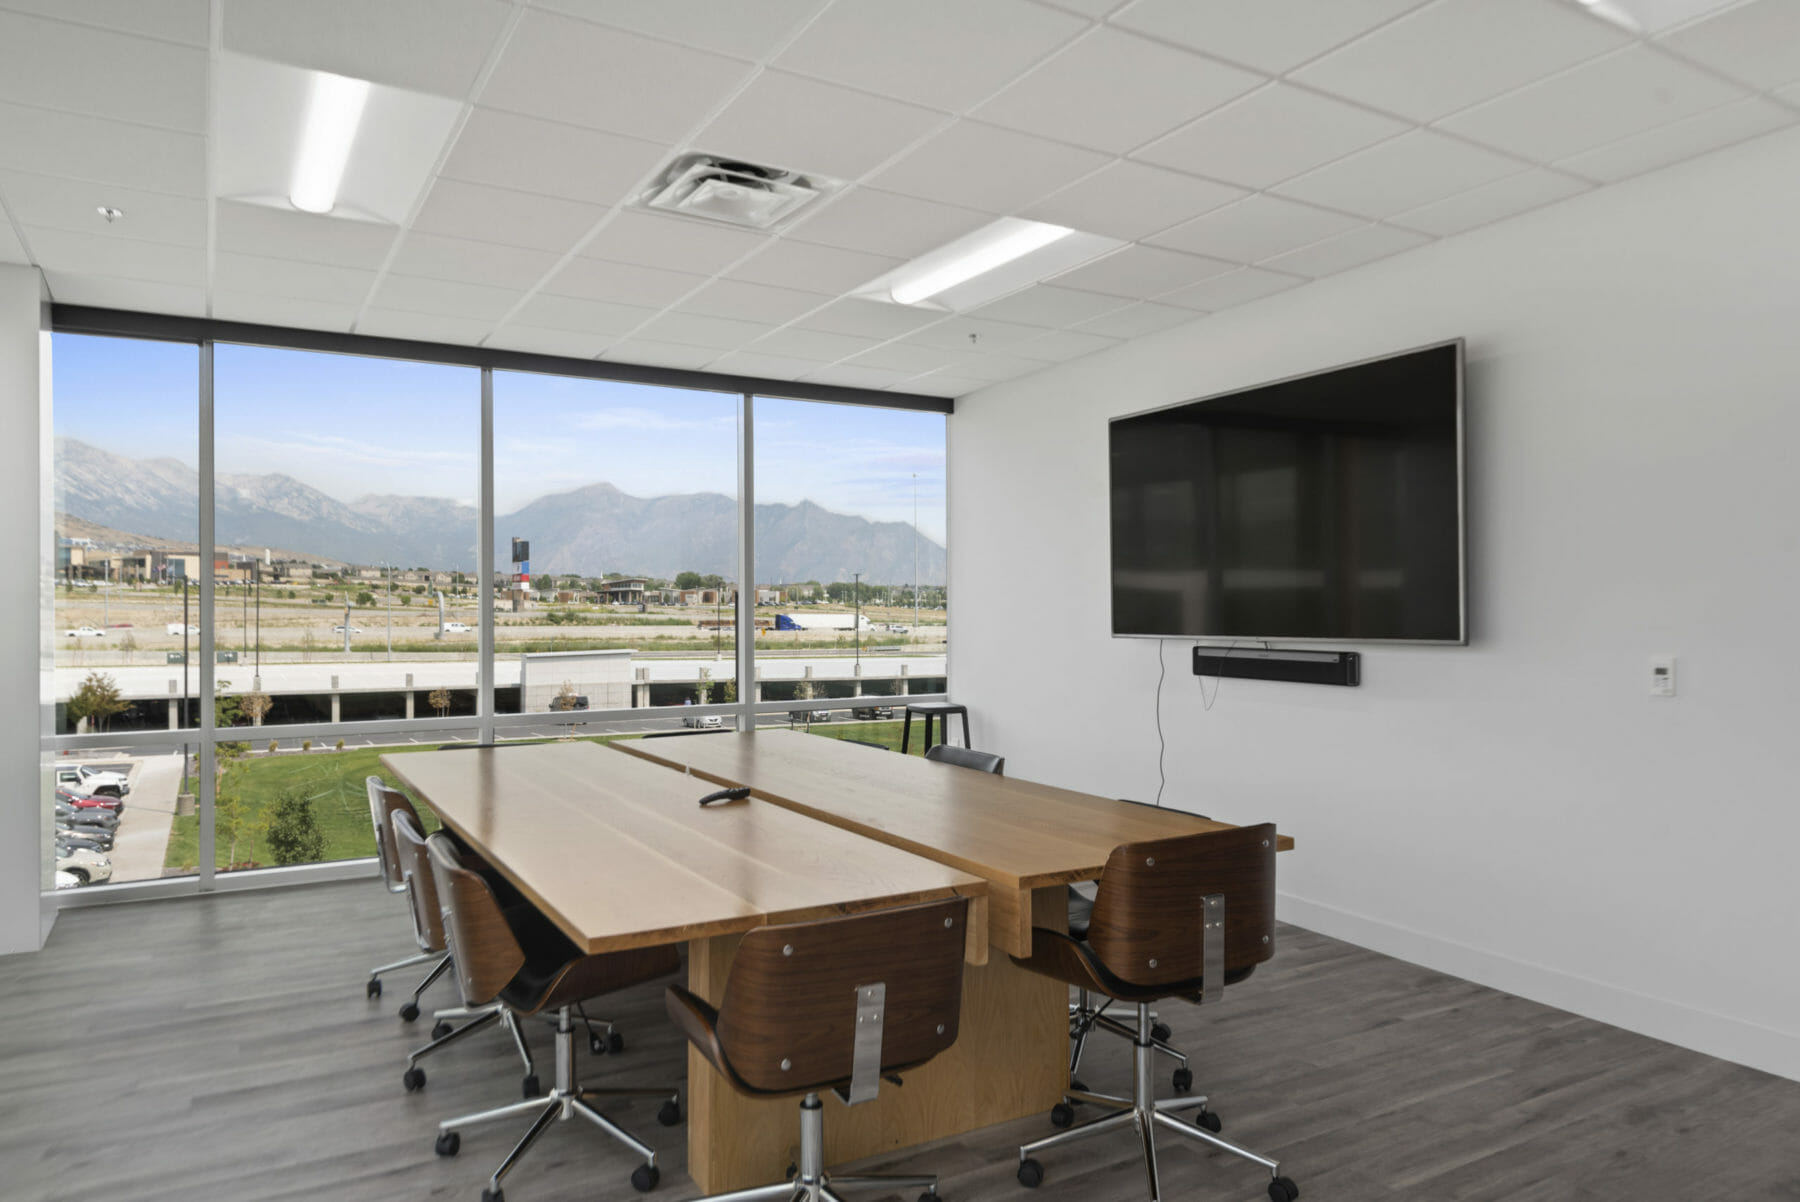 Conference room with wall of windows and mountain view Exterior of Pronto building PCF building exterior | Utah Commercial Real Estate